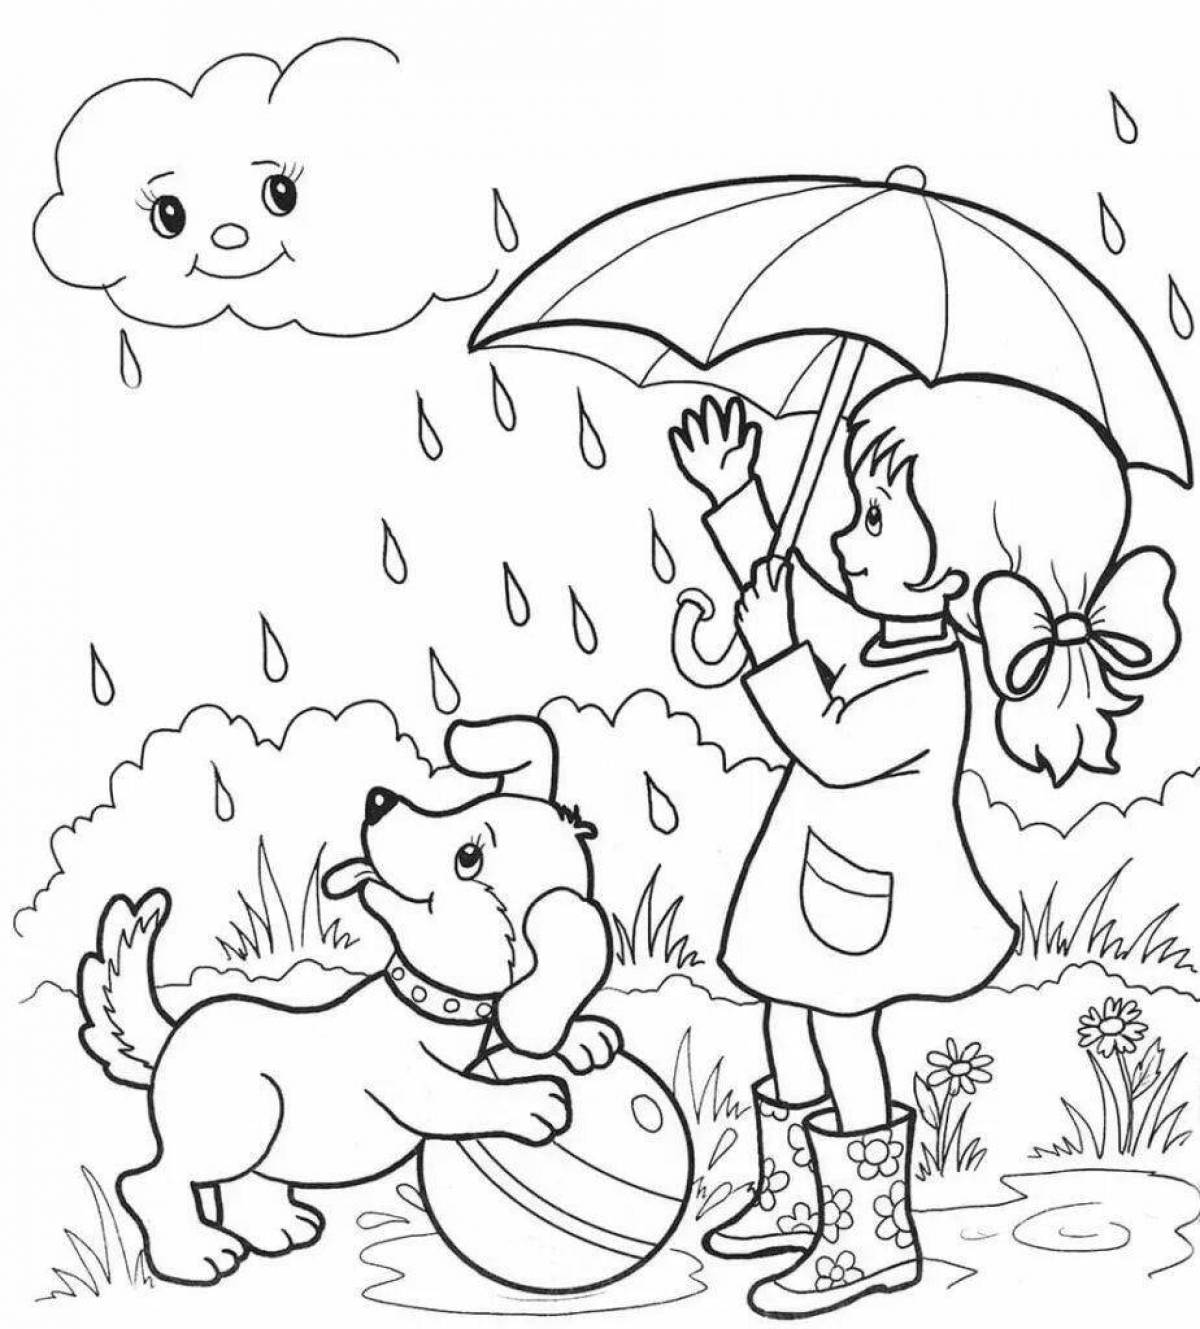 Great spring rain coloring page